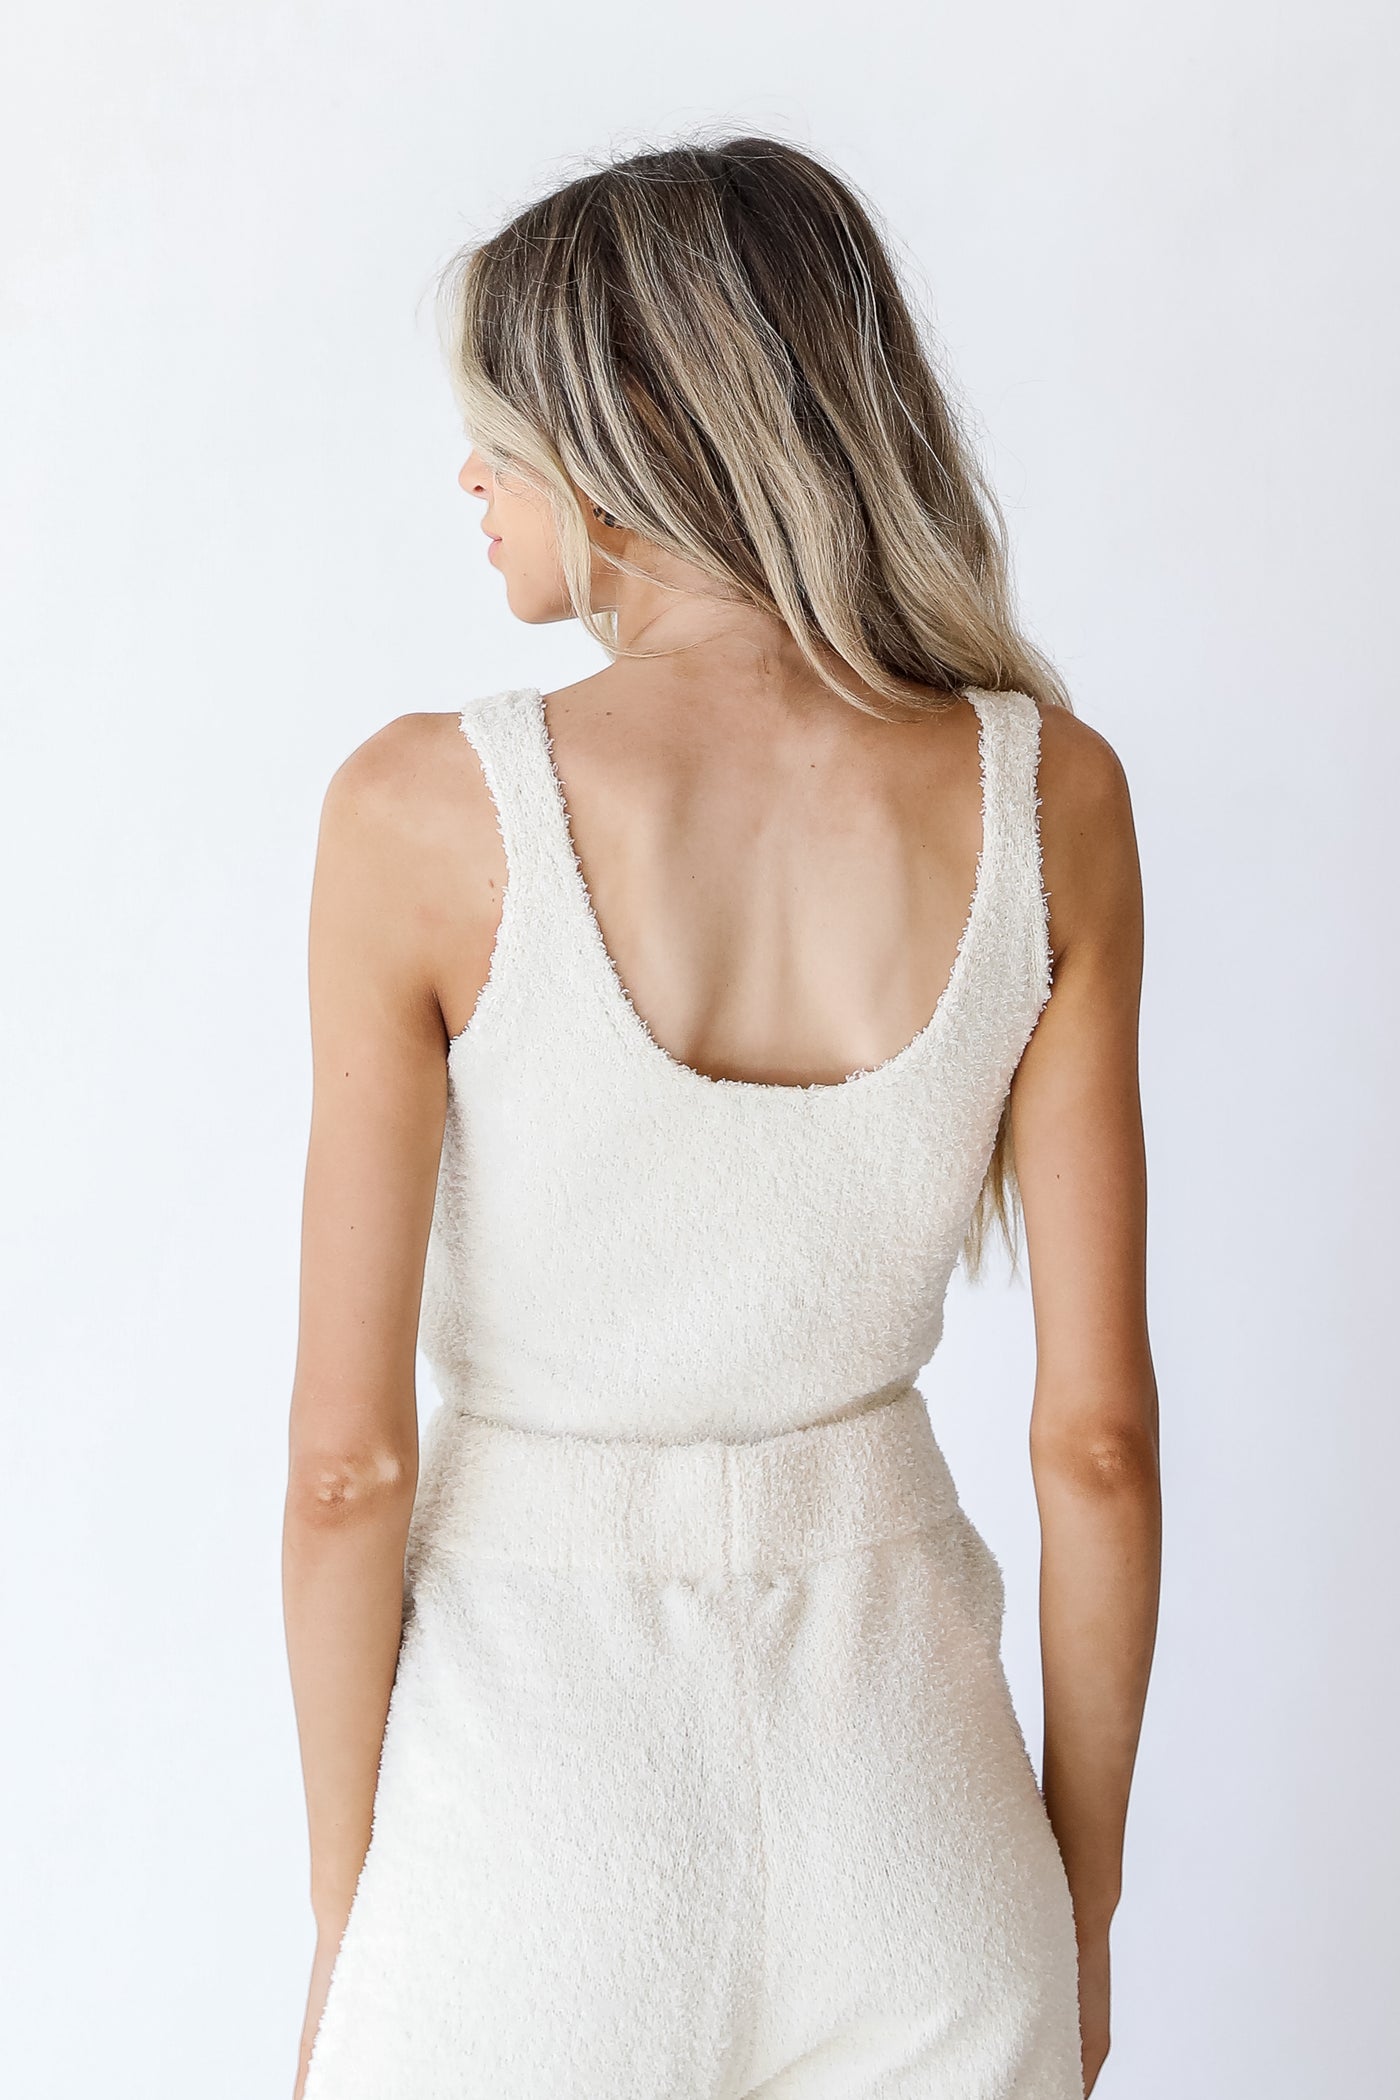 Fuzzy Knit Tank in ivory back view